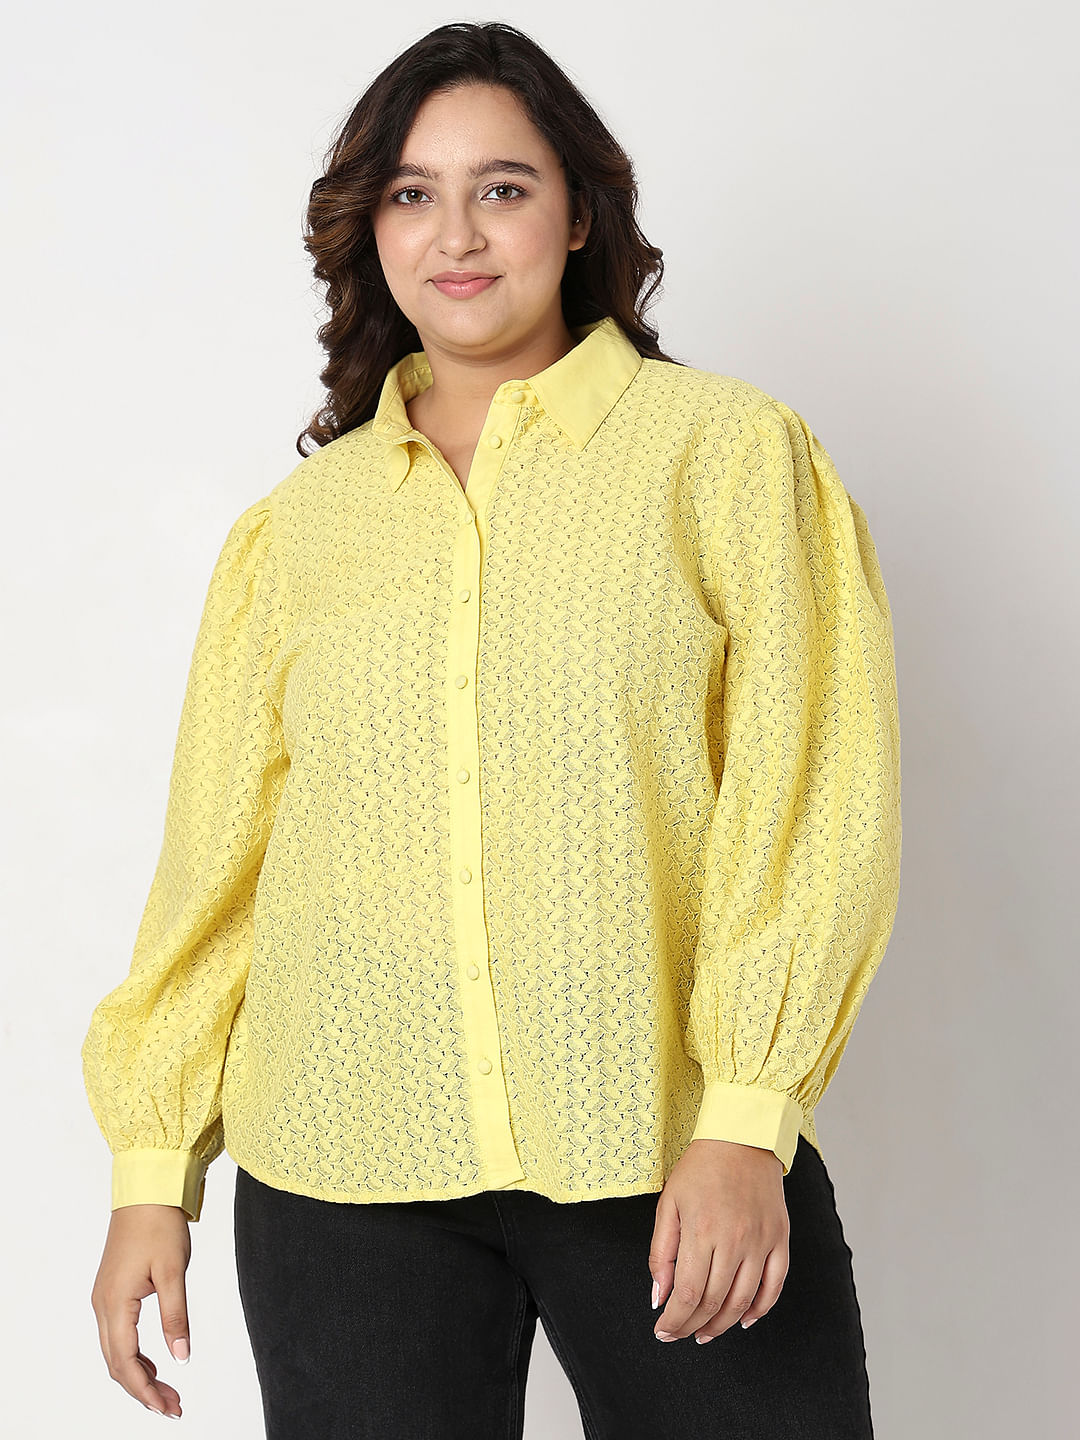 Plus Size Clothing Store Online In India  Trendy Plus Size Clothes For Men   Women